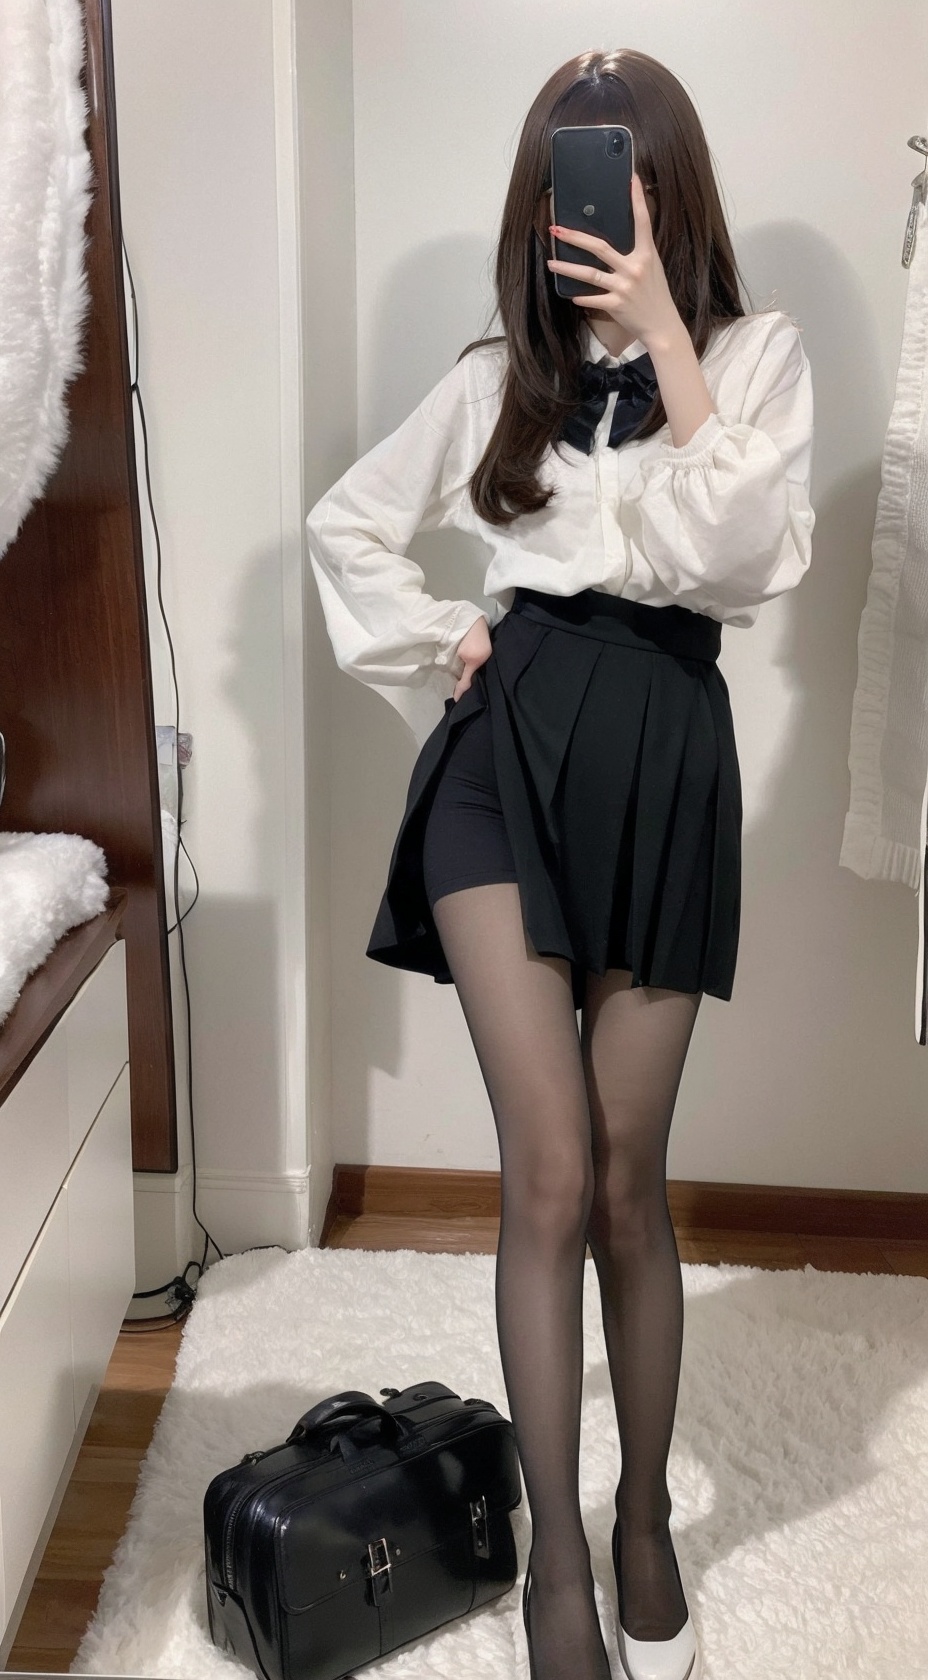  Best quality, 1girl, xtt's bodyA photo of oneself taken with a phone in front of a mirror ,full body, Wearing black Pleated skirt, wearing pantyhose , kneeling, Mobile selfie perspective, shapely body,midnight, xtt